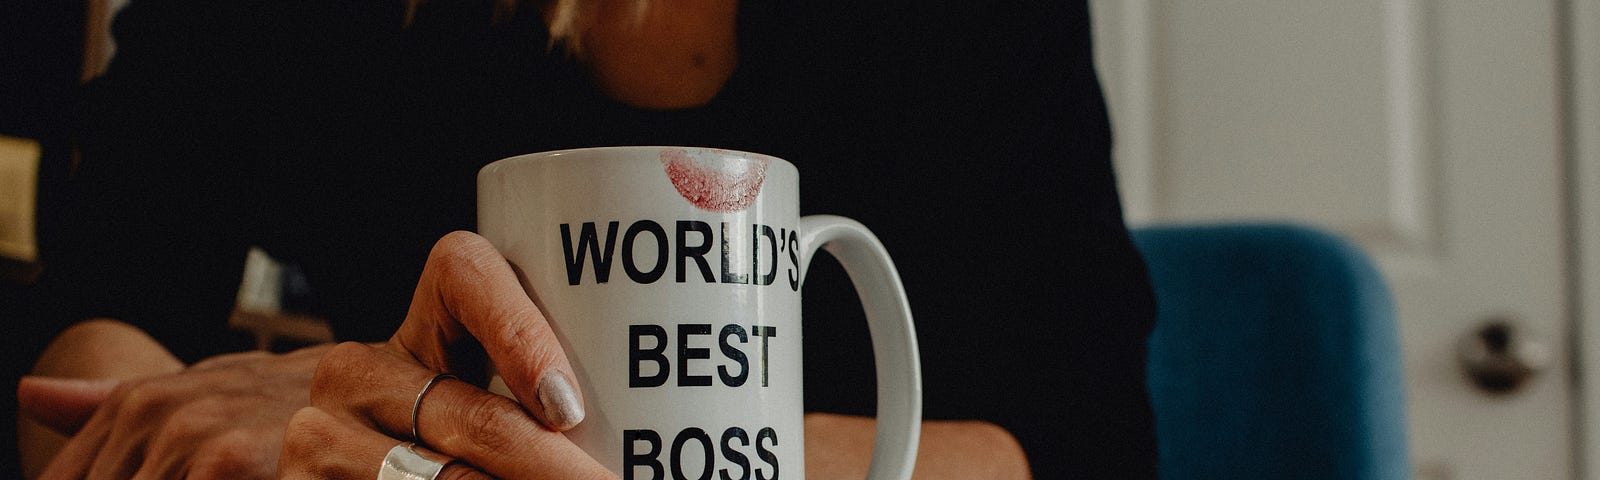 A hand holding a mug that reads: “World’s Best Boss”. The hand has long fingernails with nail polish, and the mug has a lipstick mark on it.